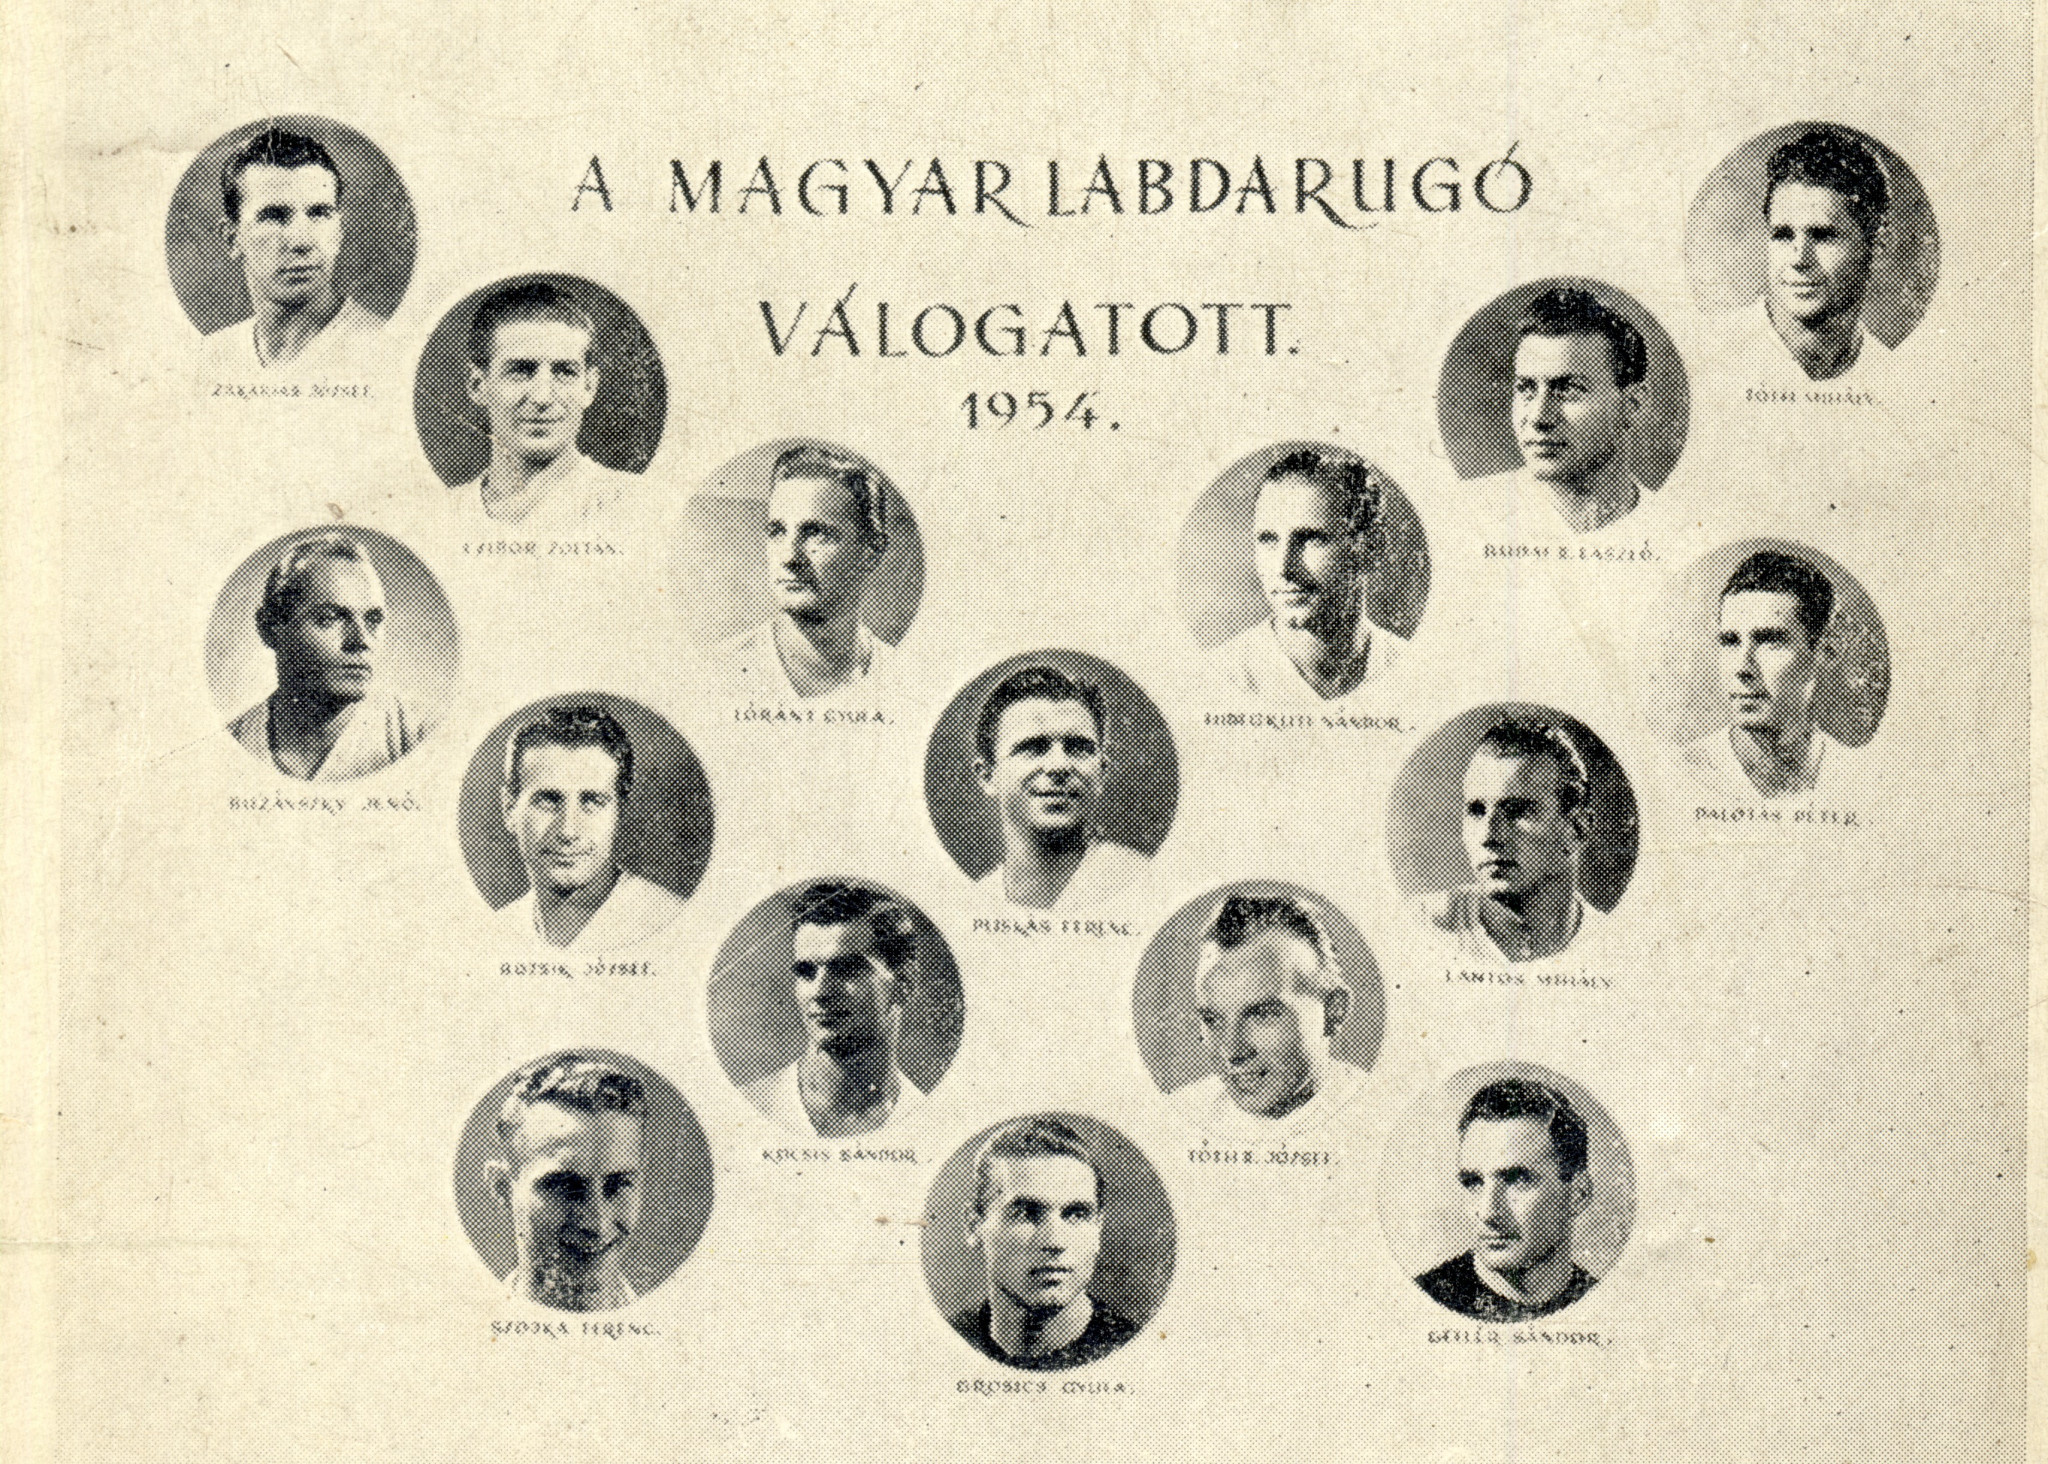 Hungary's Golden Team depicted in a post card in 1954 ©Hungarian Football Federation